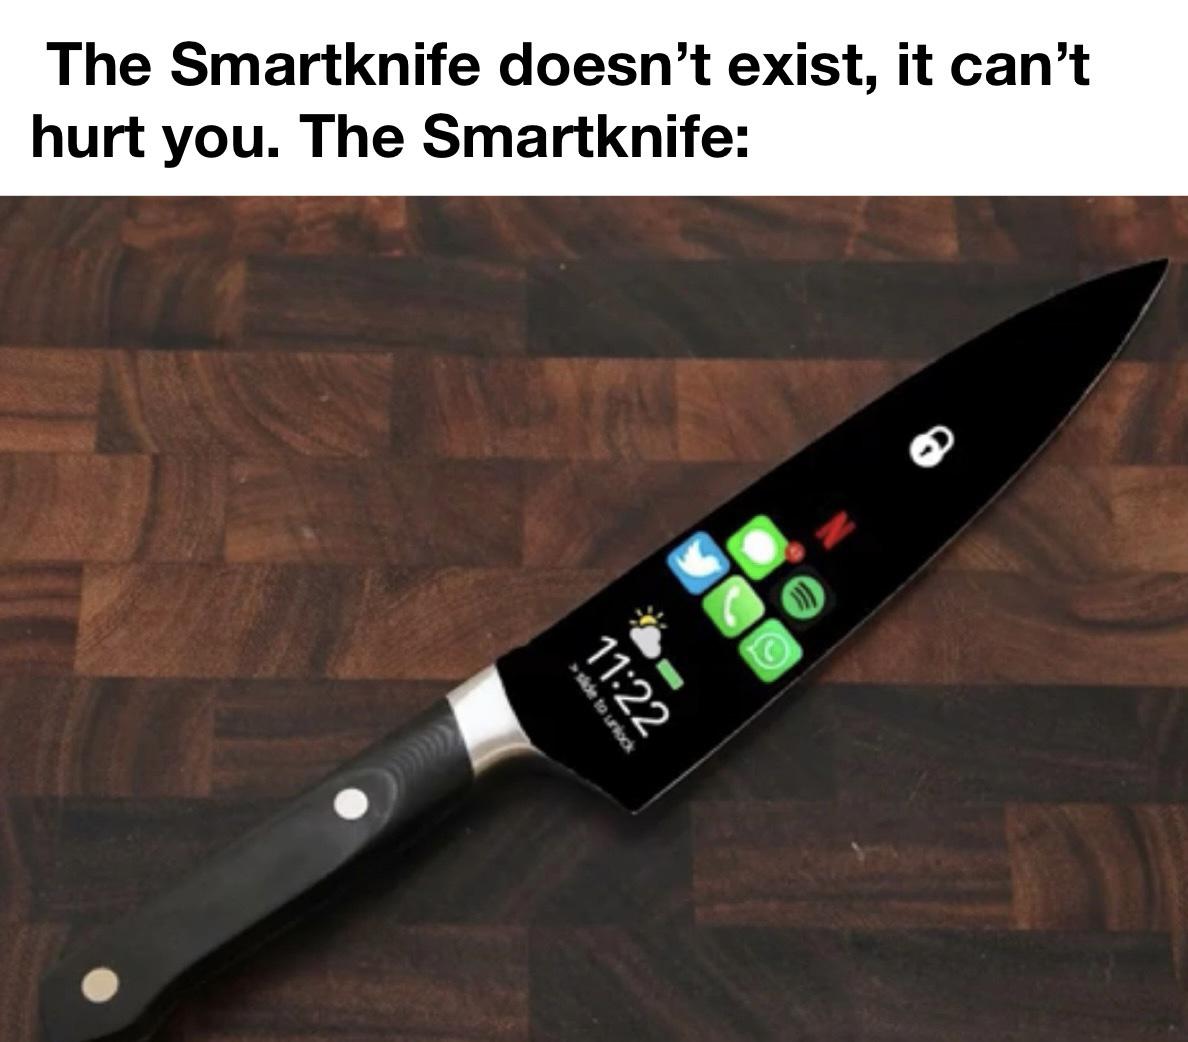 Humor - The Smartknife doesn't exist, it can't hurt you. The Smartknife >side to unlock